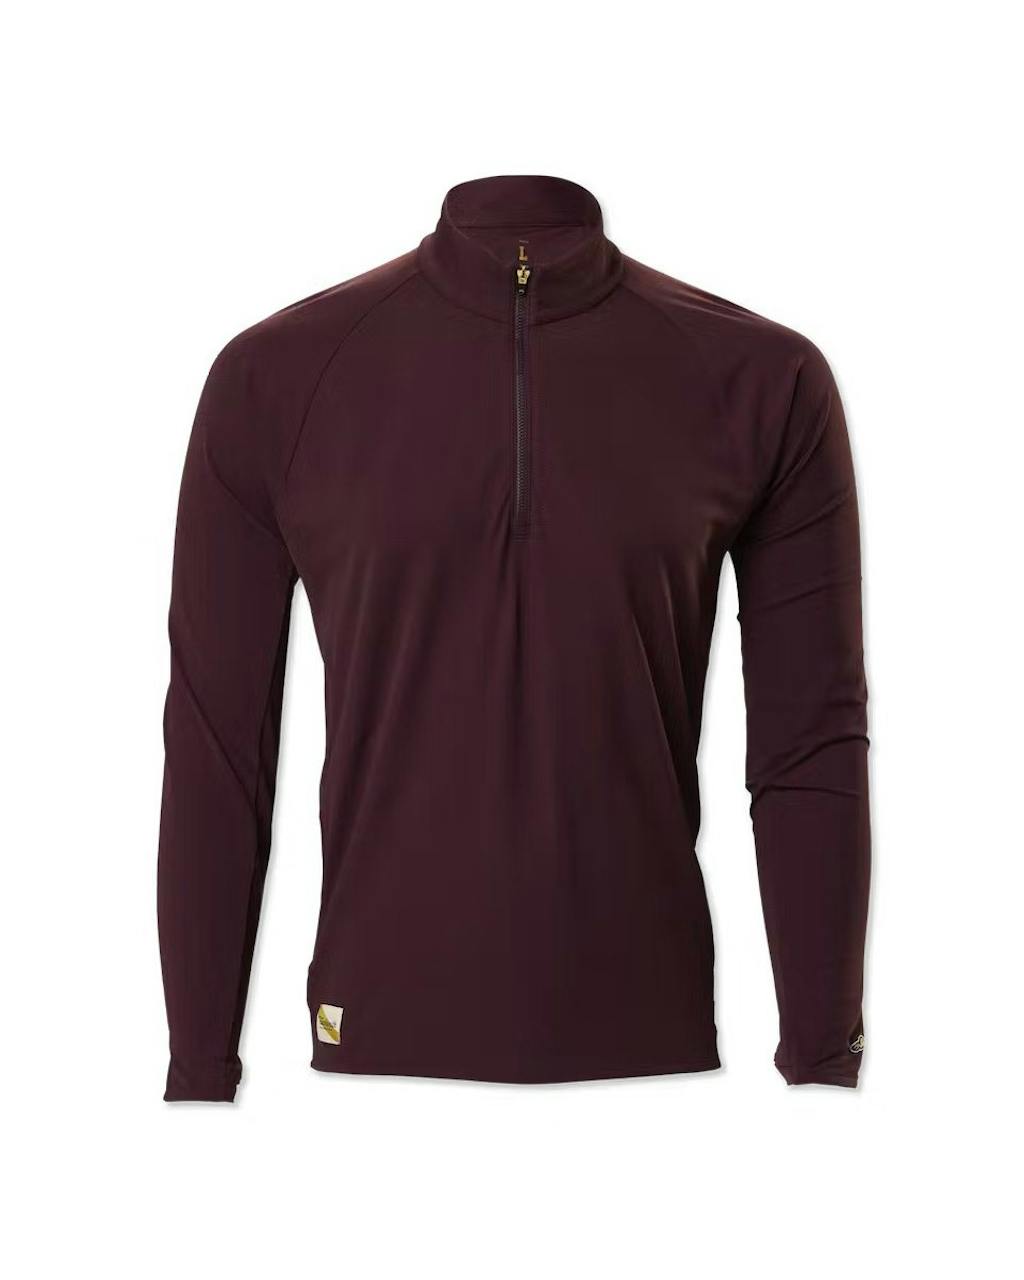 Turnover Performance Half-Zip Pullover